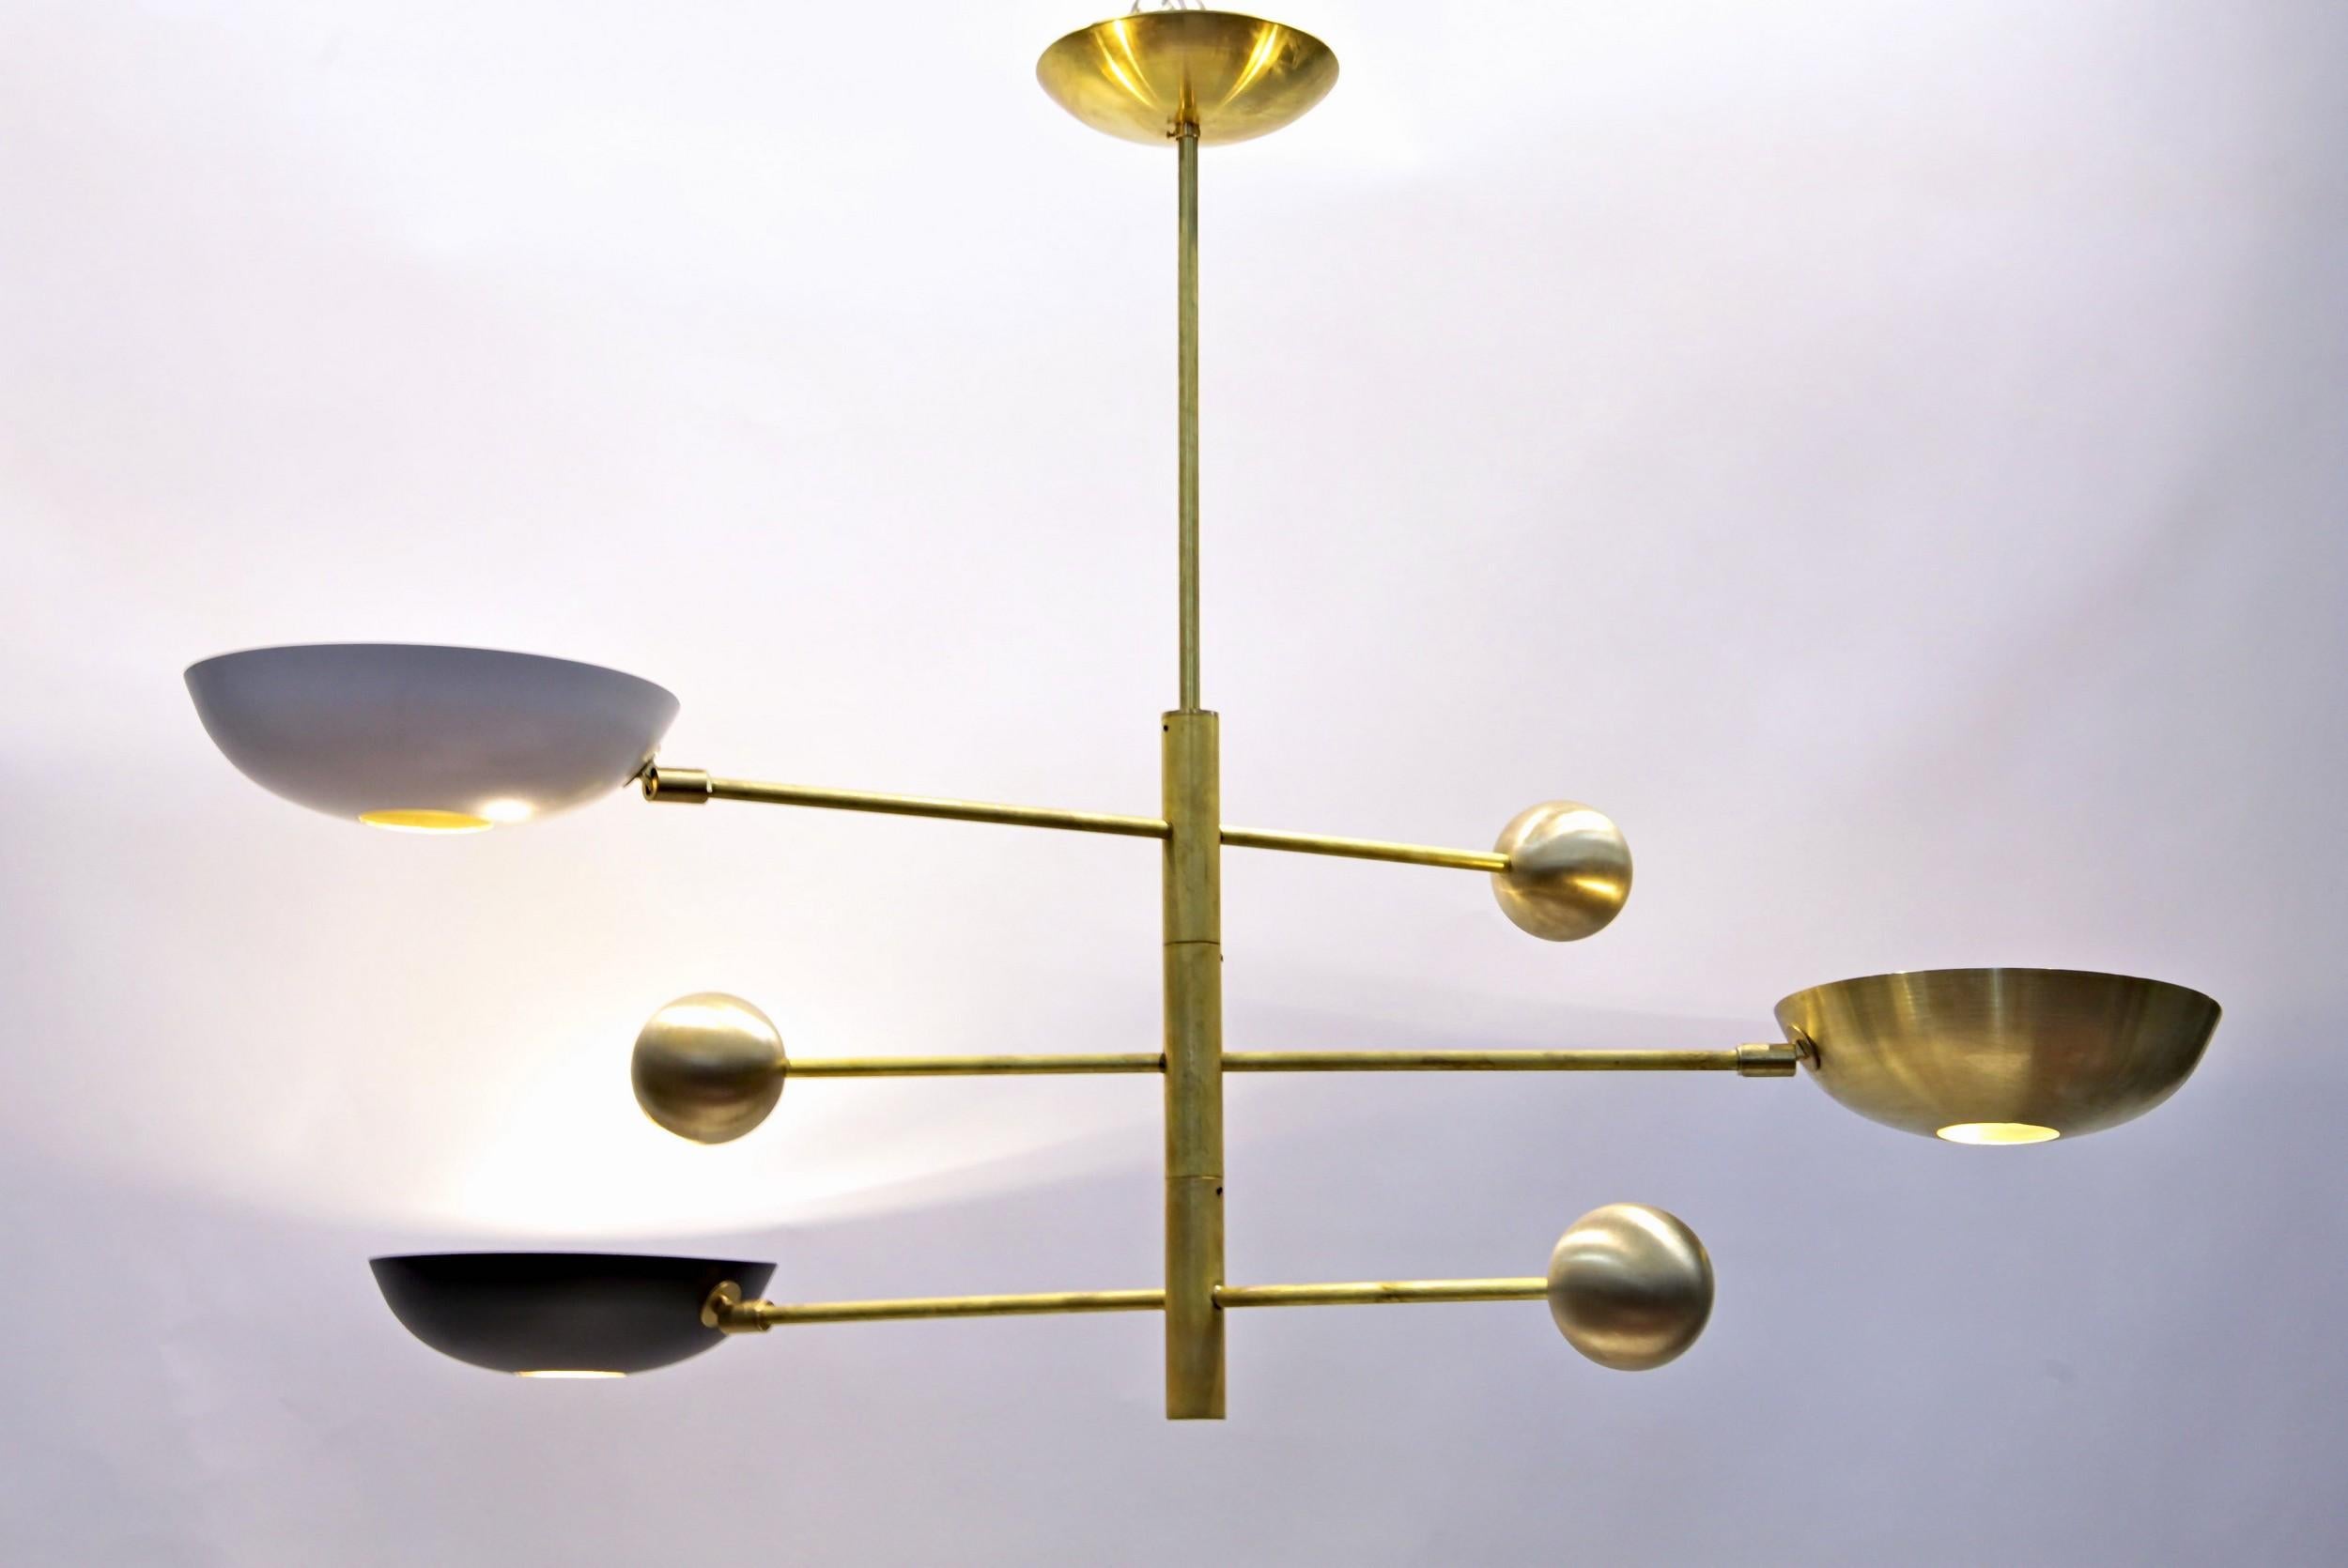 Orbitale Brass Chandelier 3 Rotating Balanced Arms, 120 cm 48 inches diameter For Sale 1